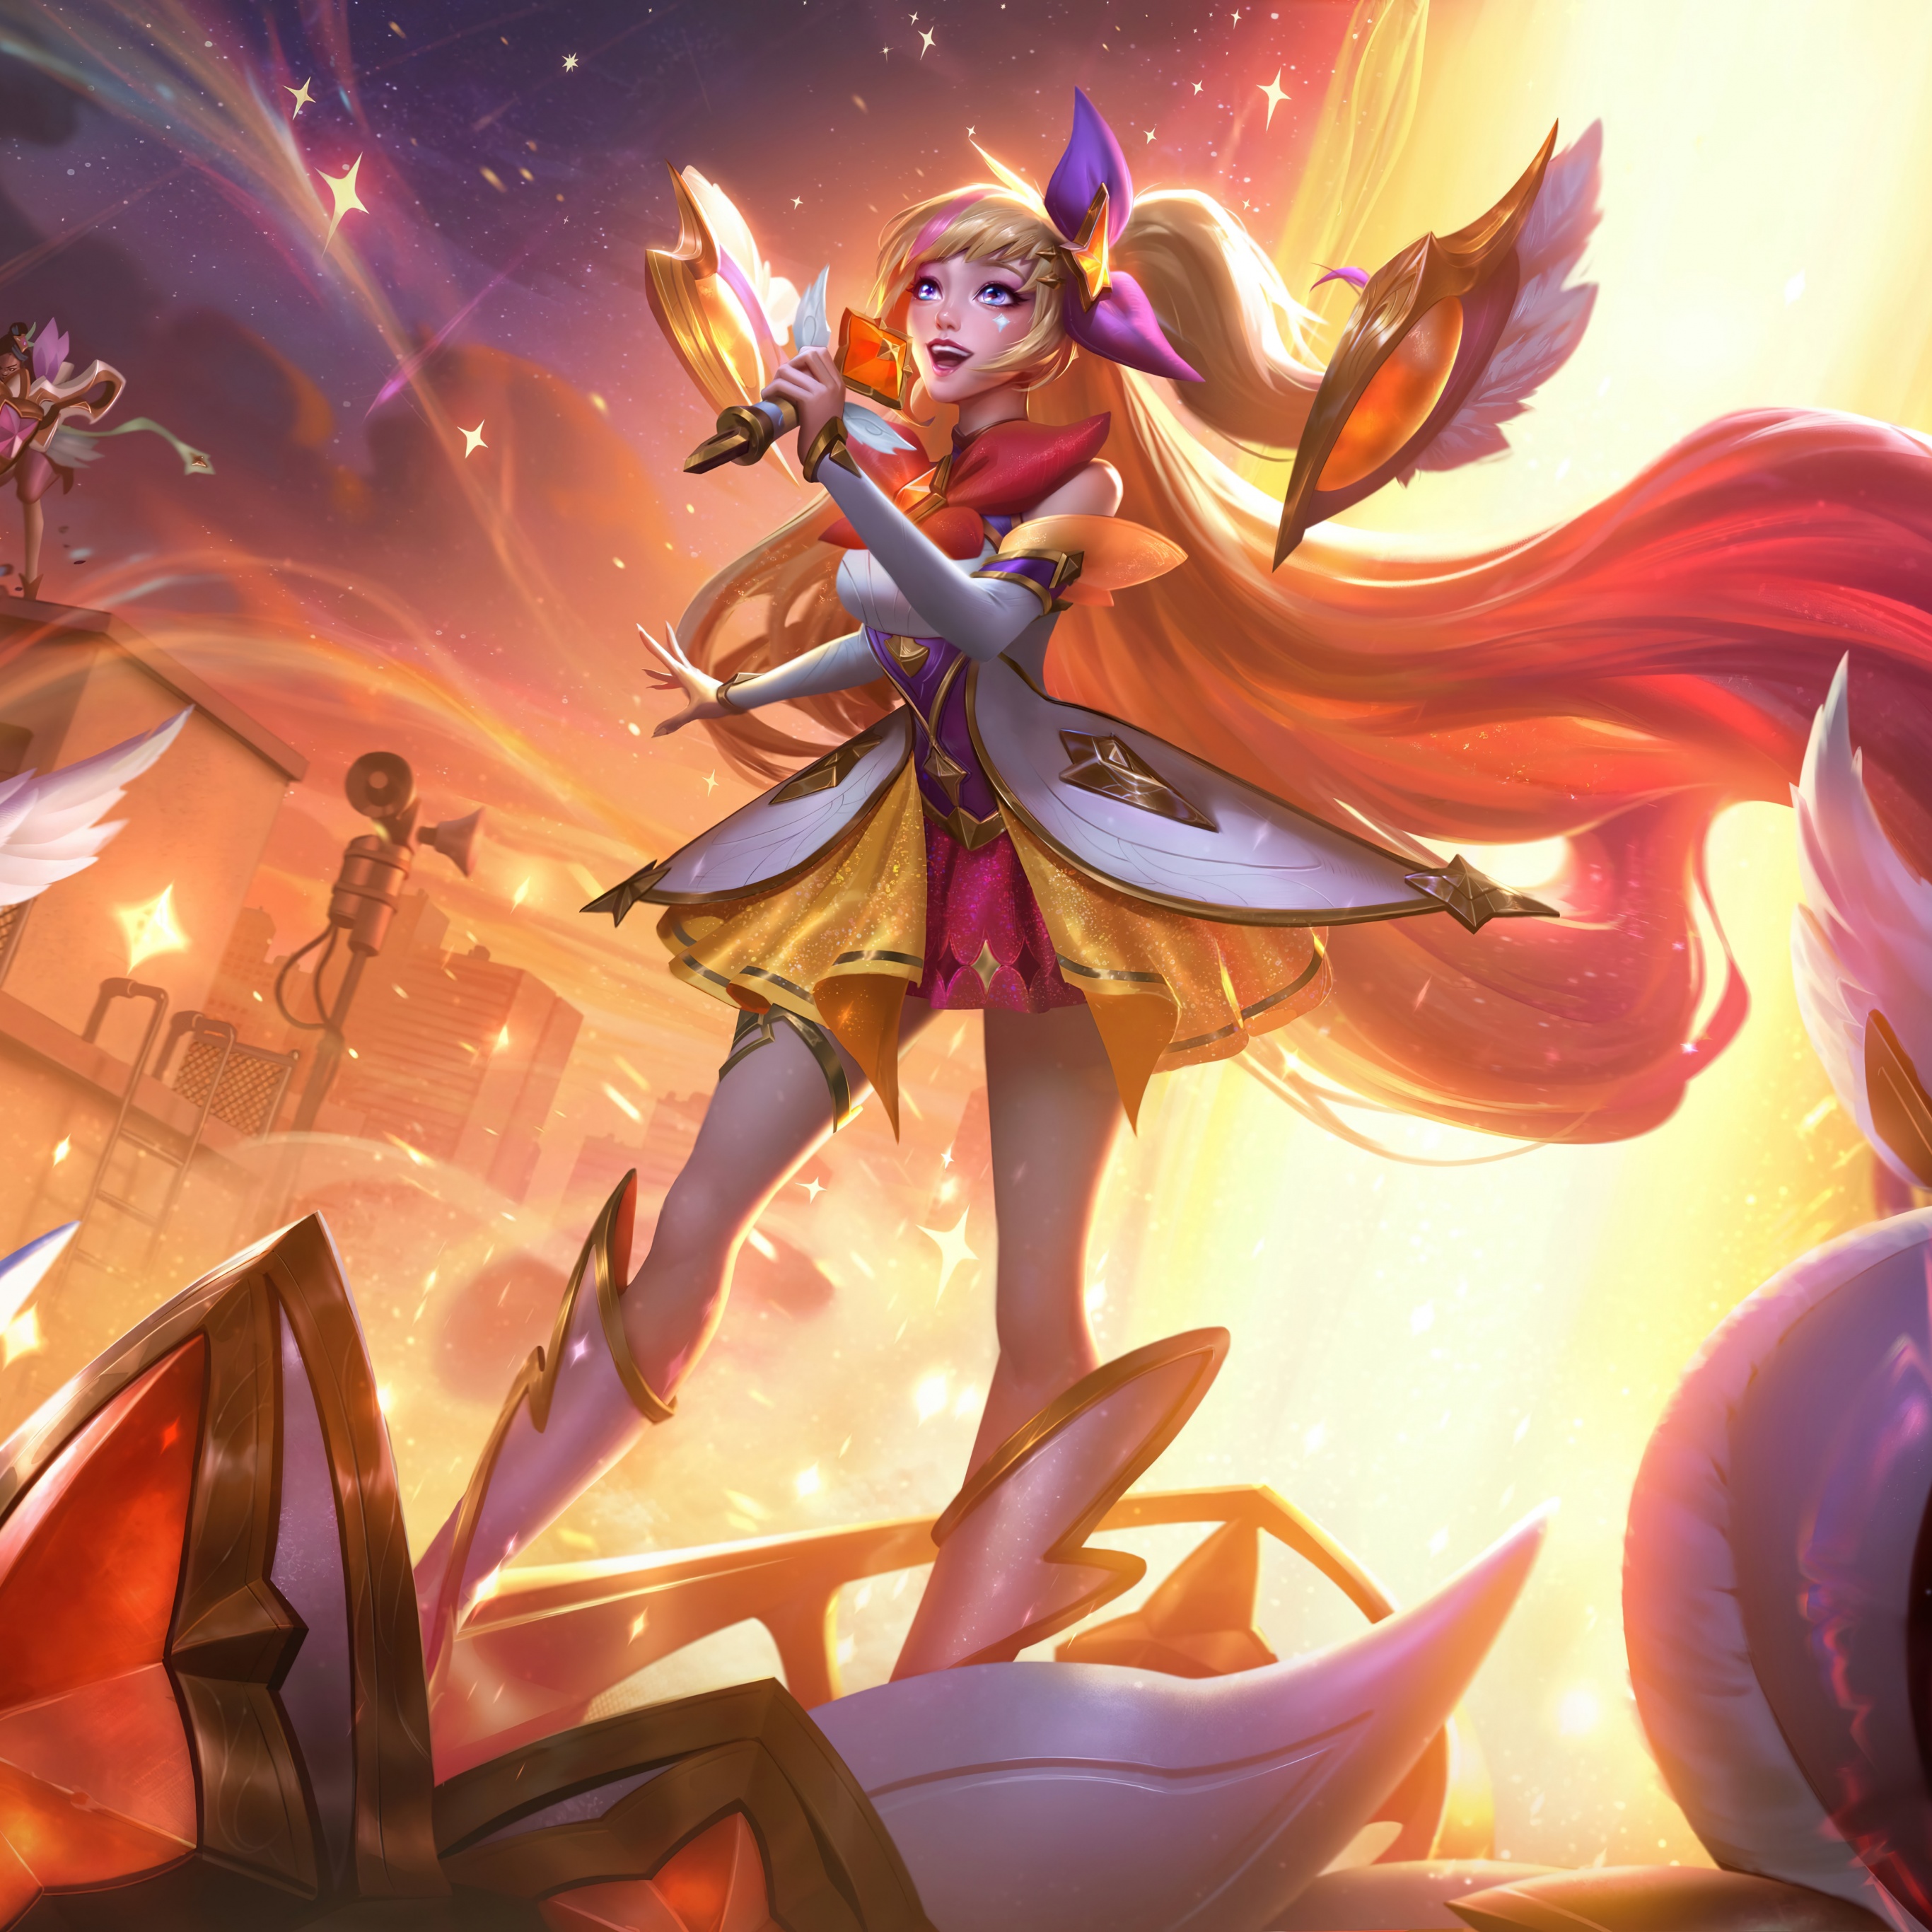 League of legends Janna video game Star Guardian Lux Jinx Poppy Janna Lulu  4k Ultra HD wallpapers for computer and laptop 3840x2400  Wallpapers13com